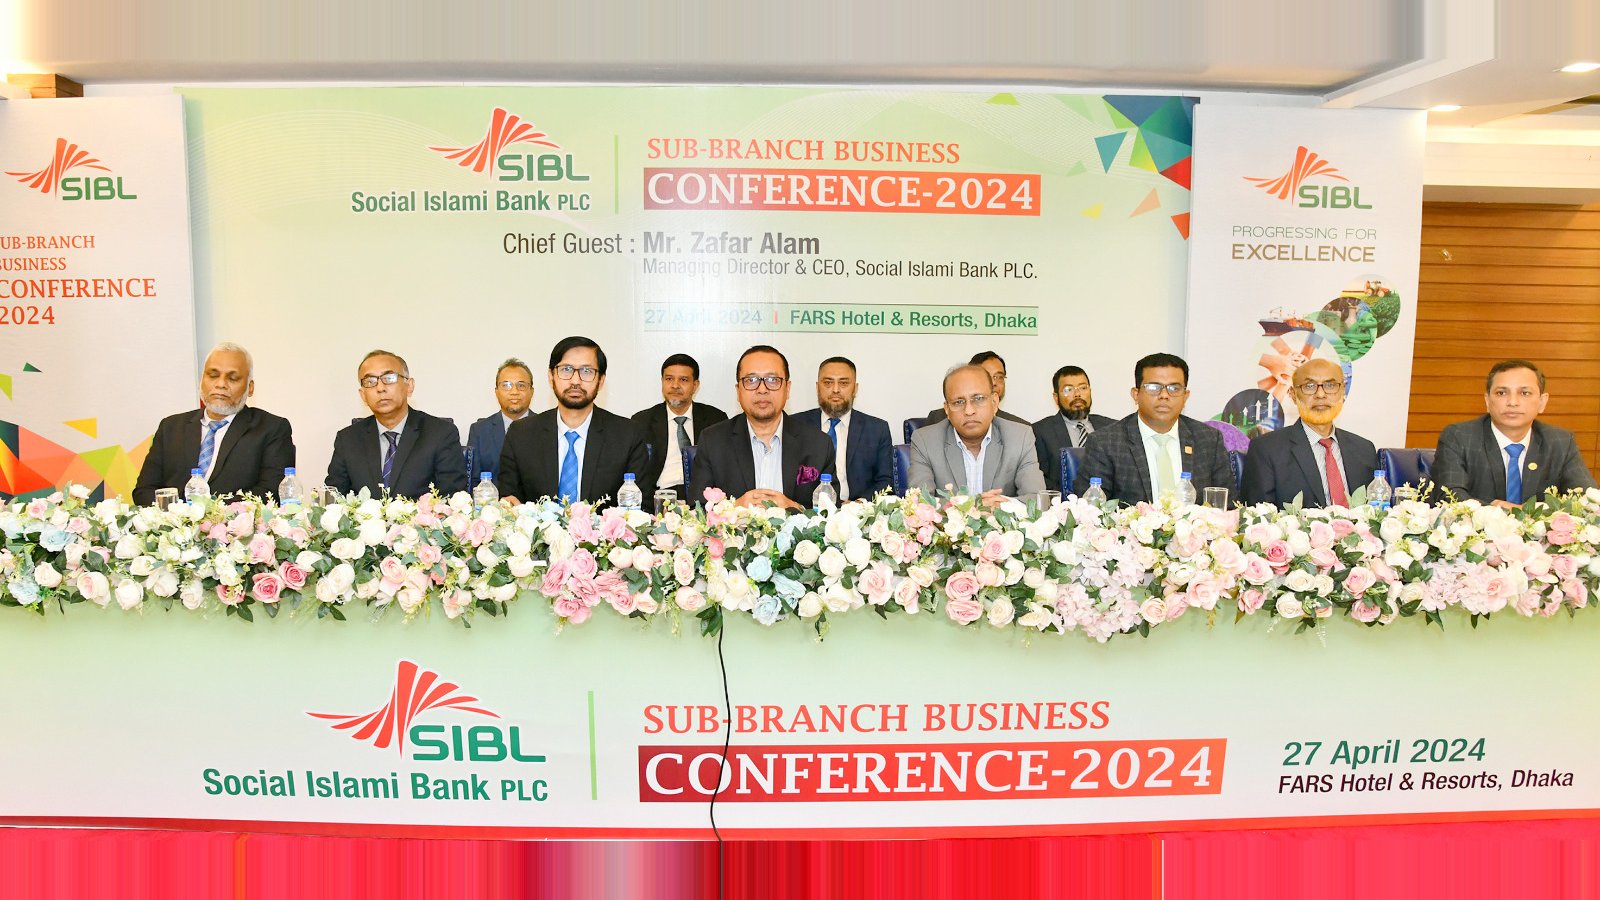 Social Islami Bank branches host Annual Business Conference - 2024